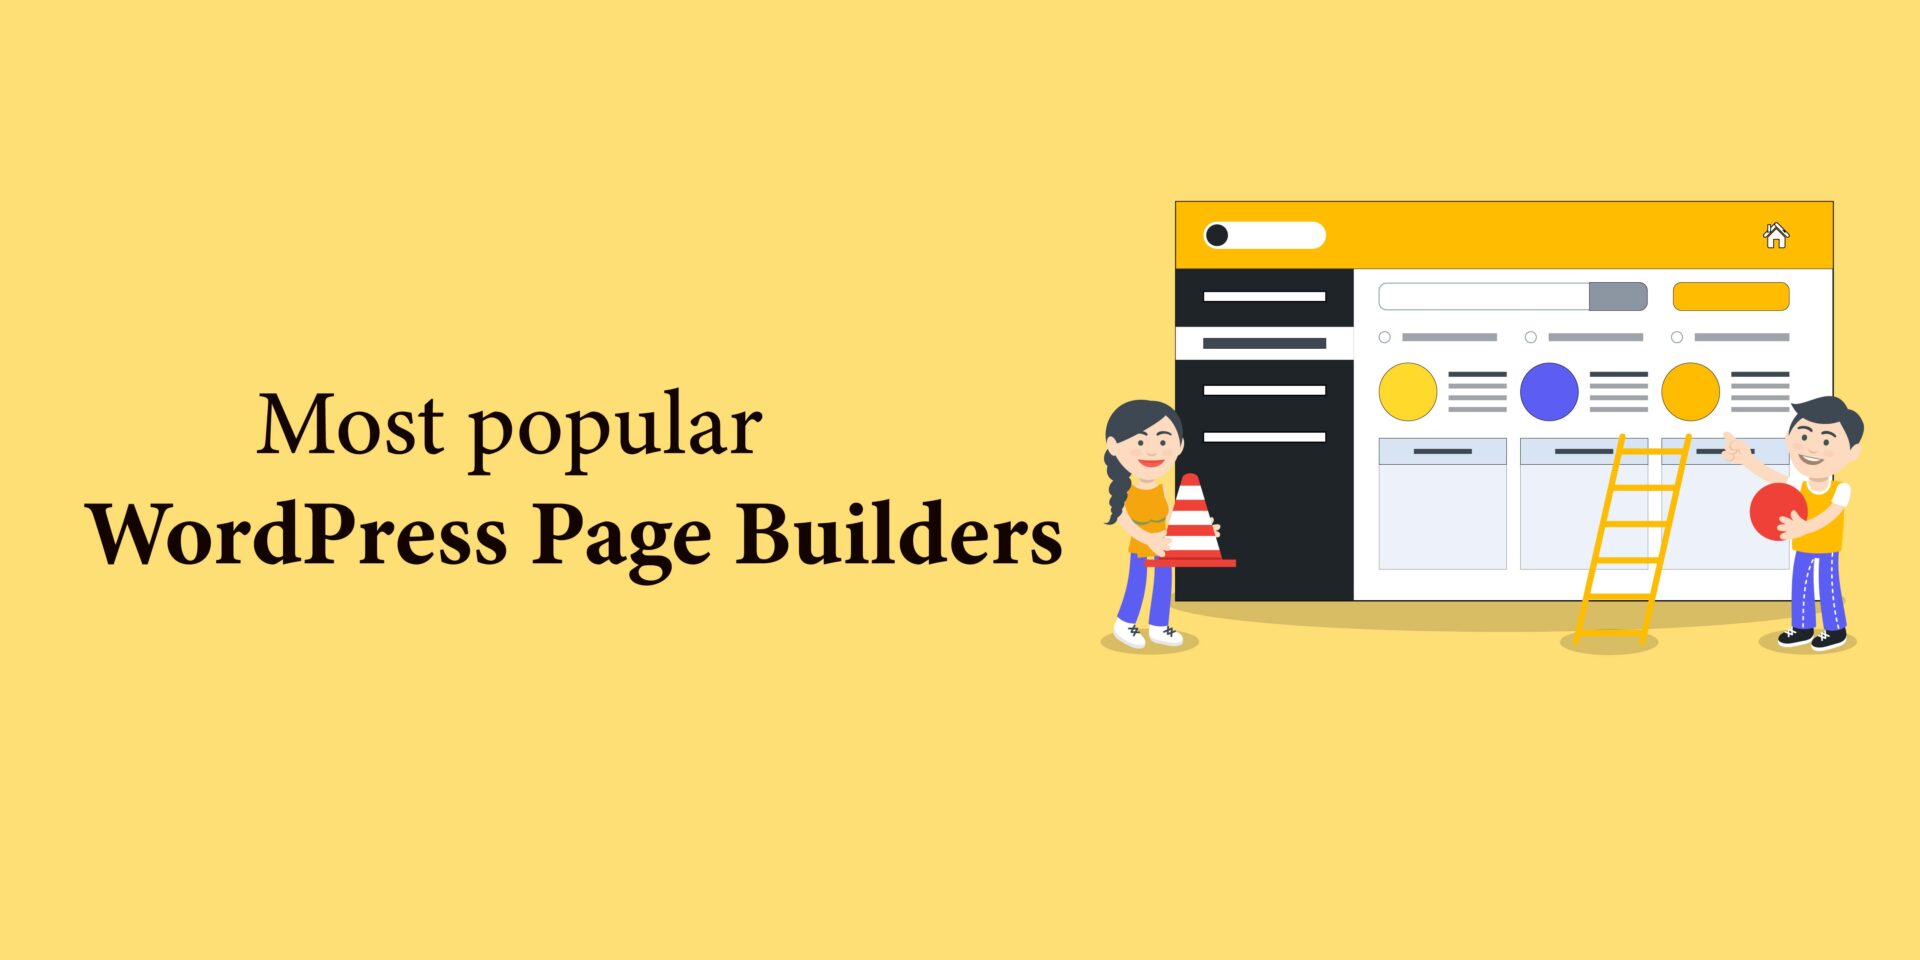 5 Most popular WordPress Page Builders in 2022 to try